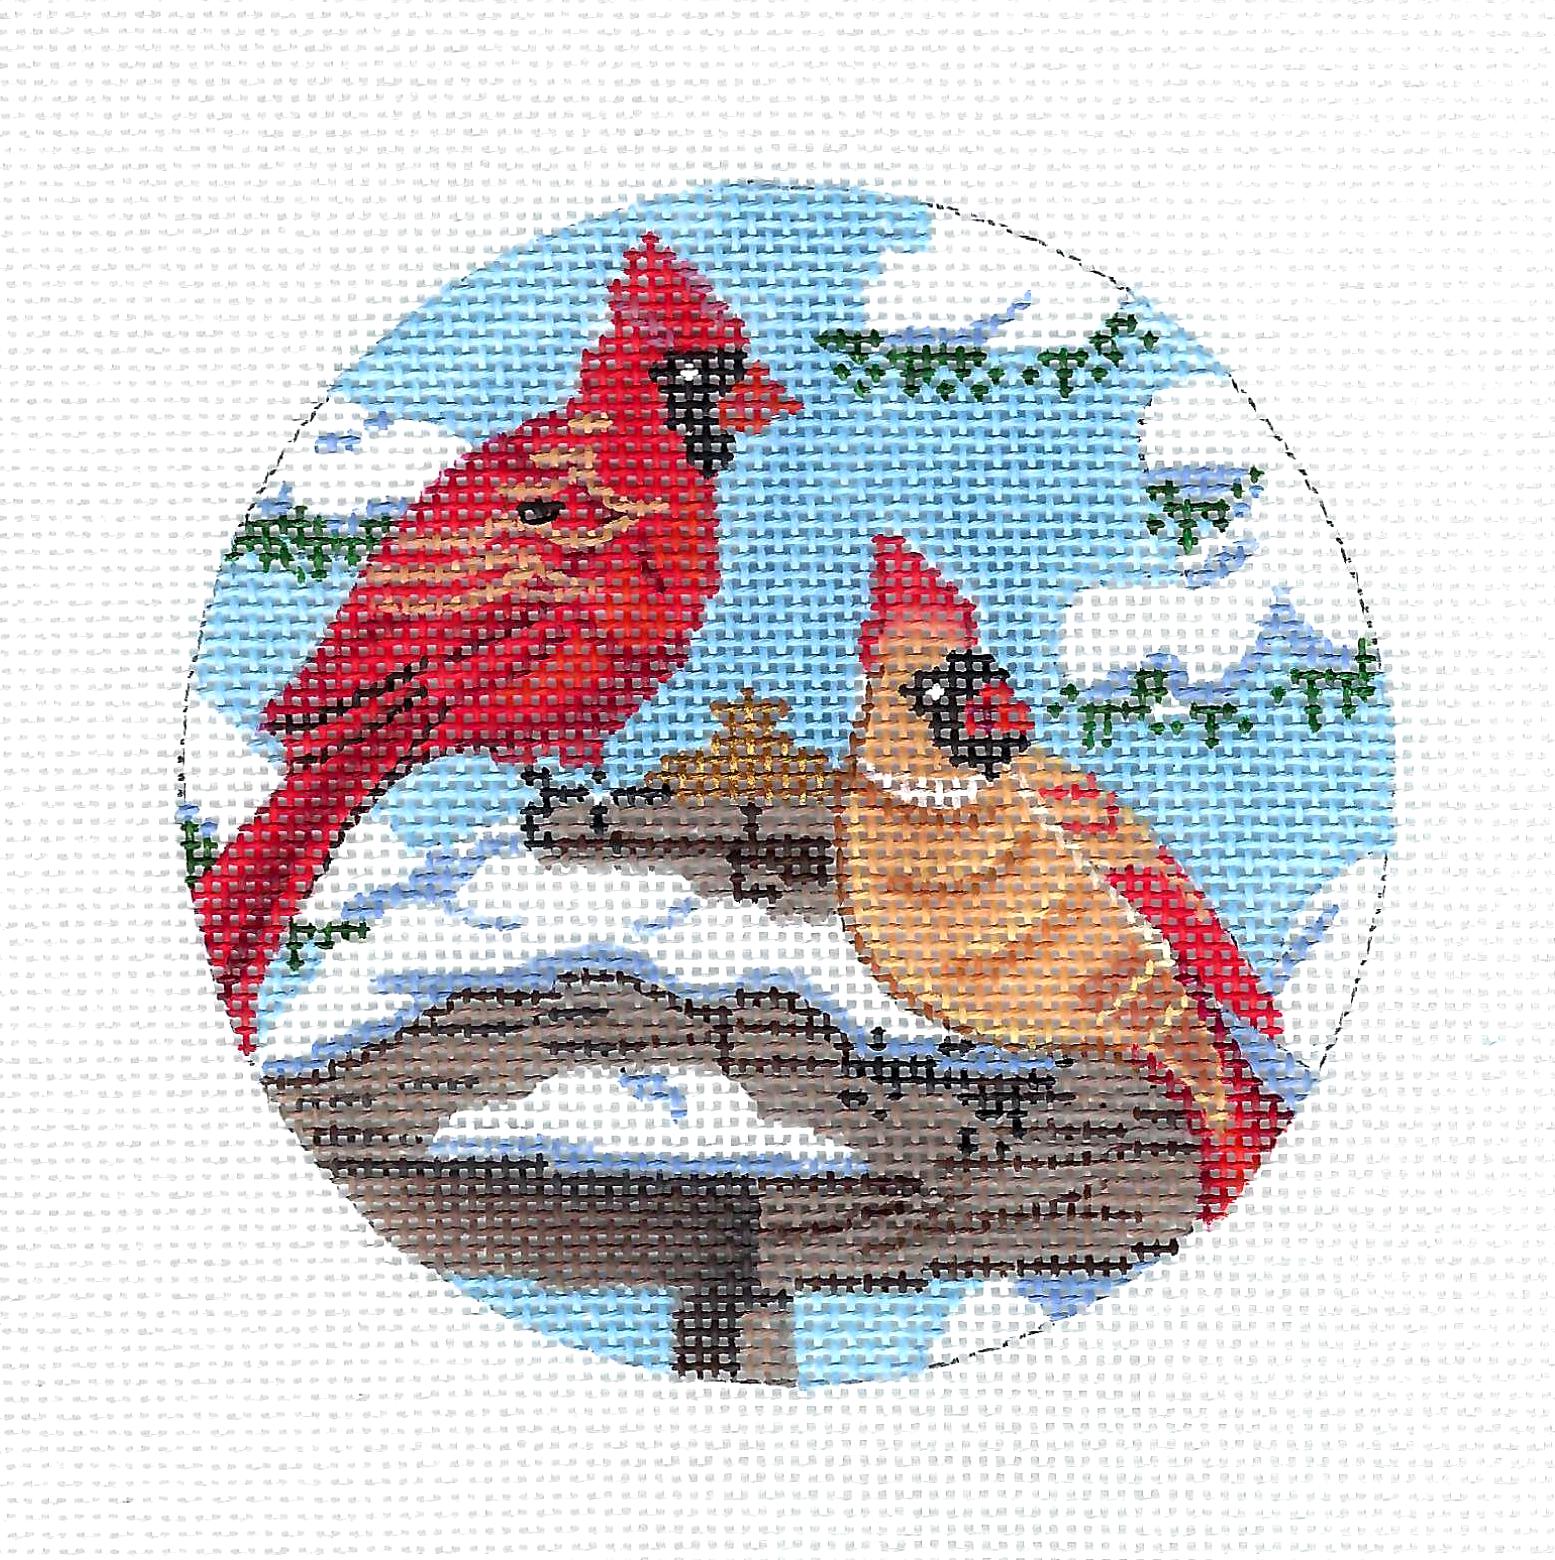 Cardinal Stocking hand-painted needlepoint stitching canvas, Needlepoint  Canvases & Threads